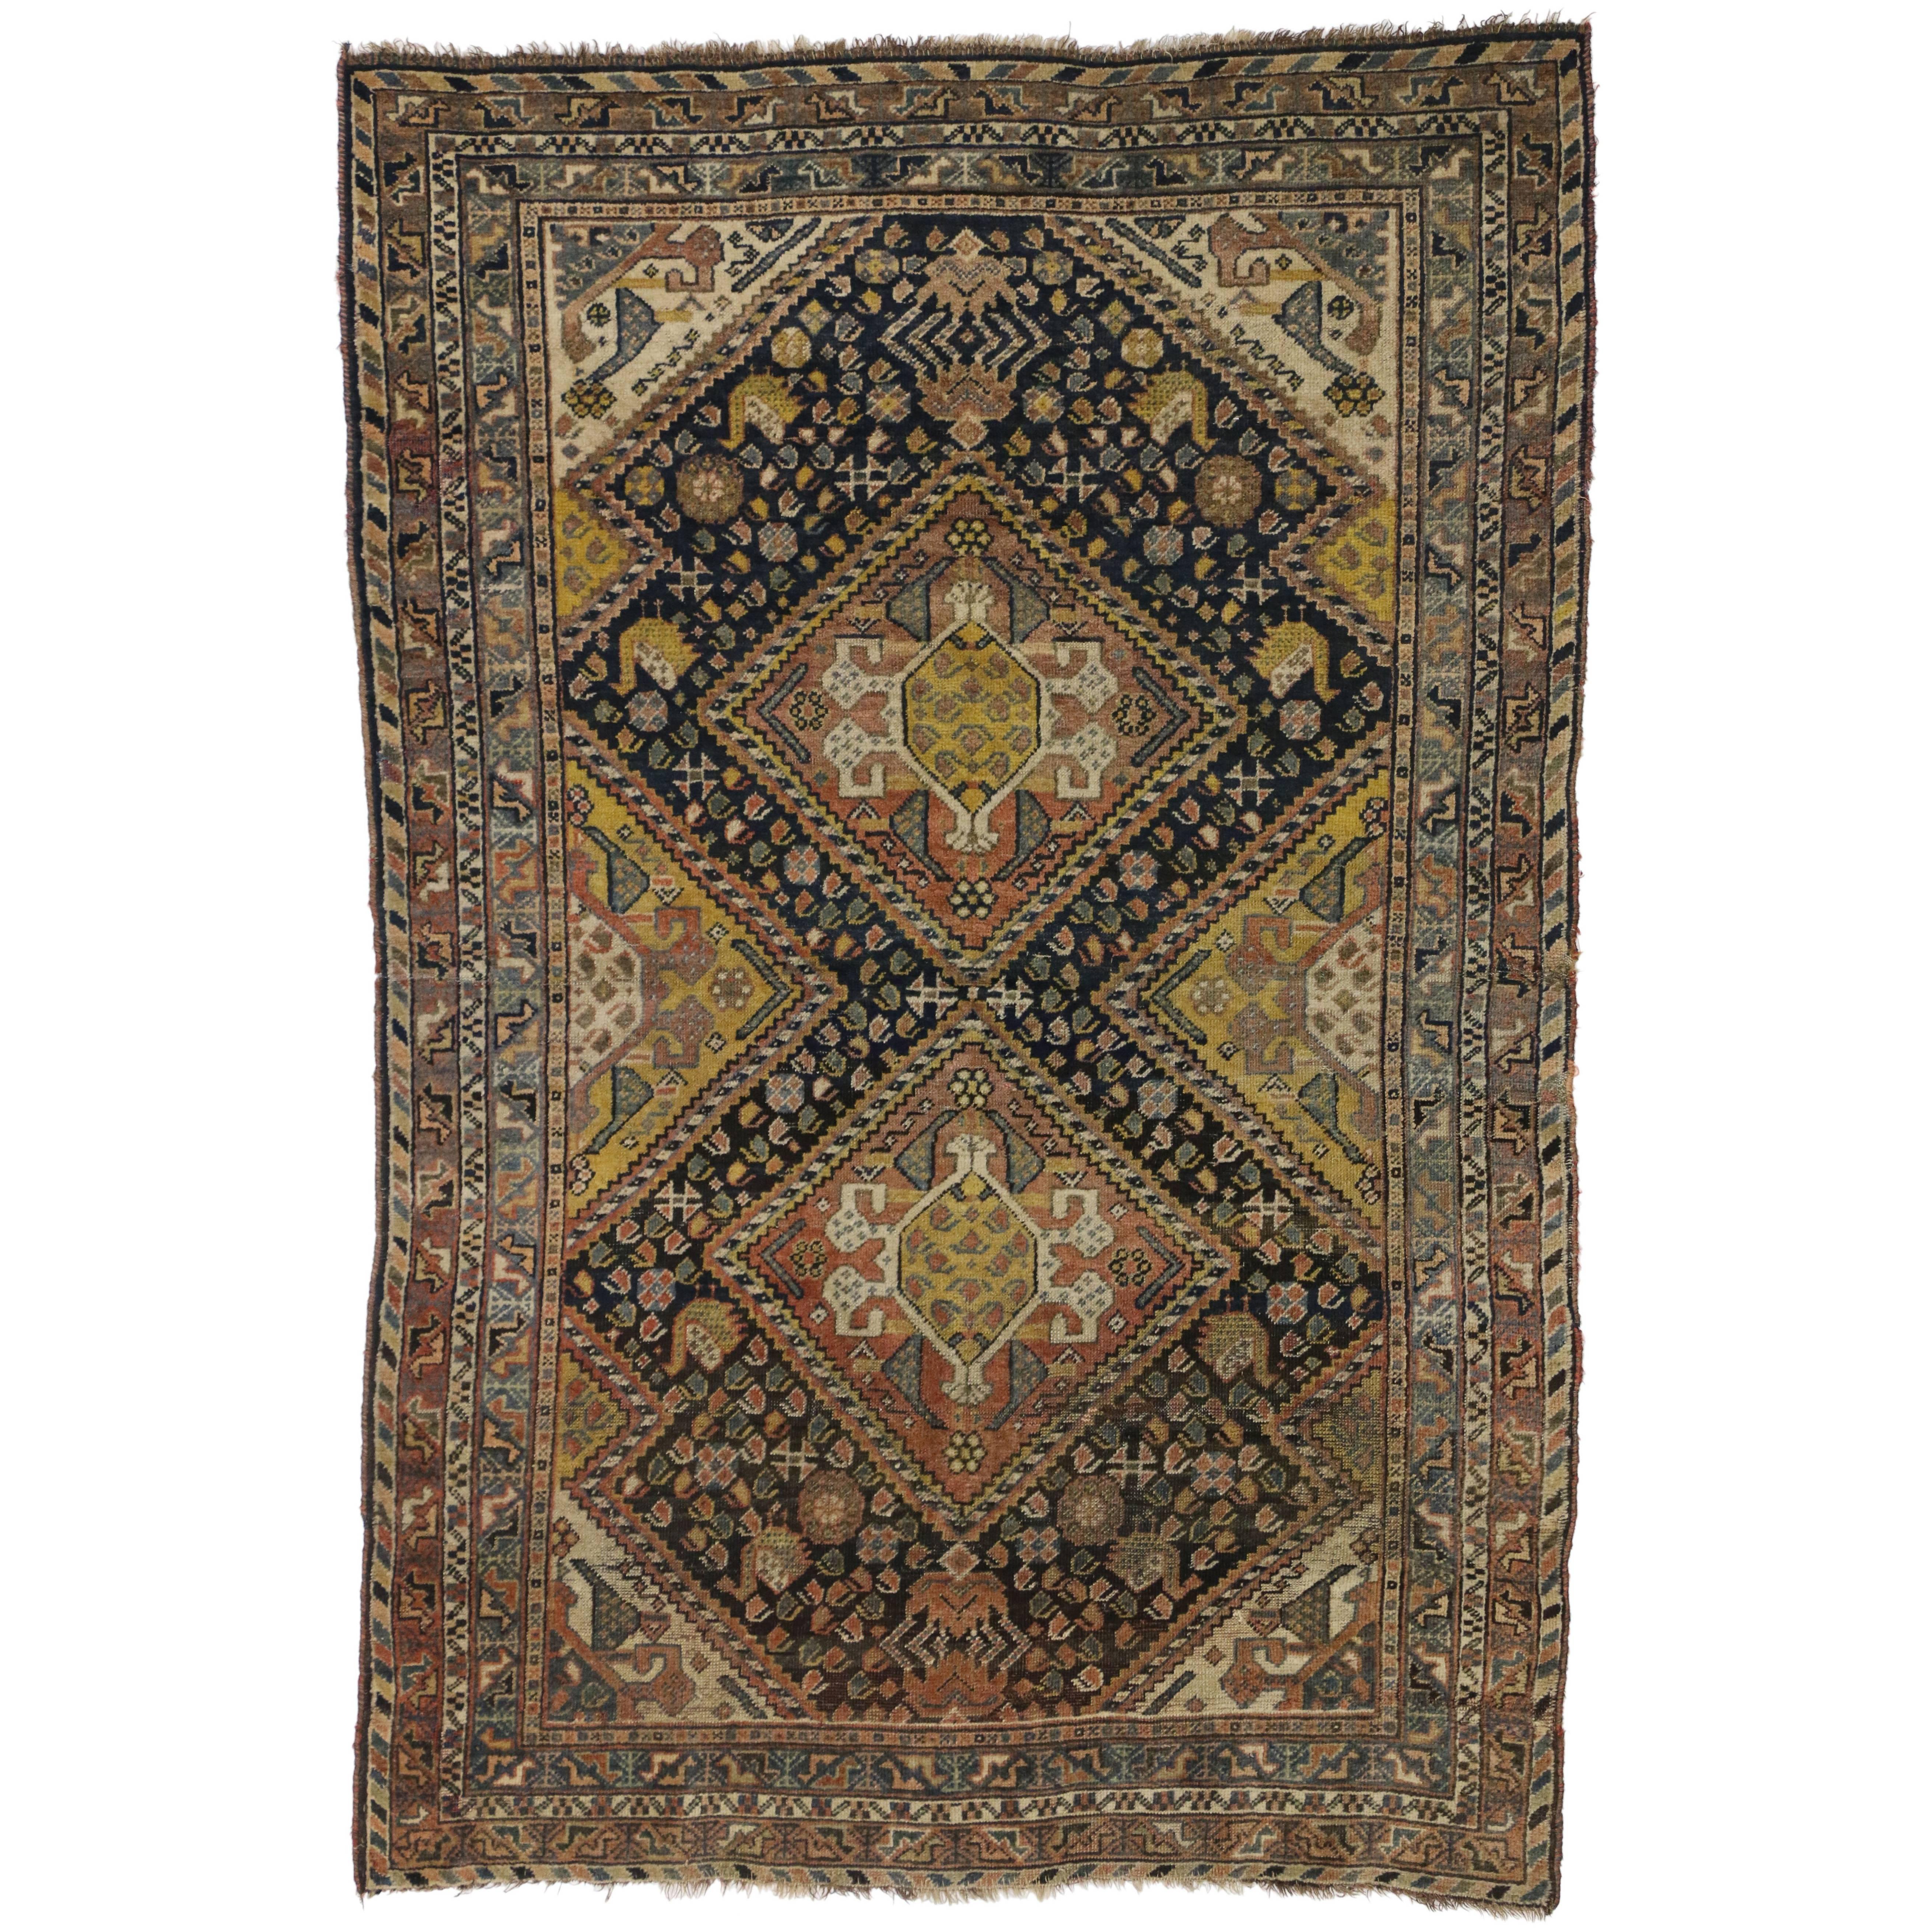 Antique Shiraz Persian Rug with Modern Tribal Style